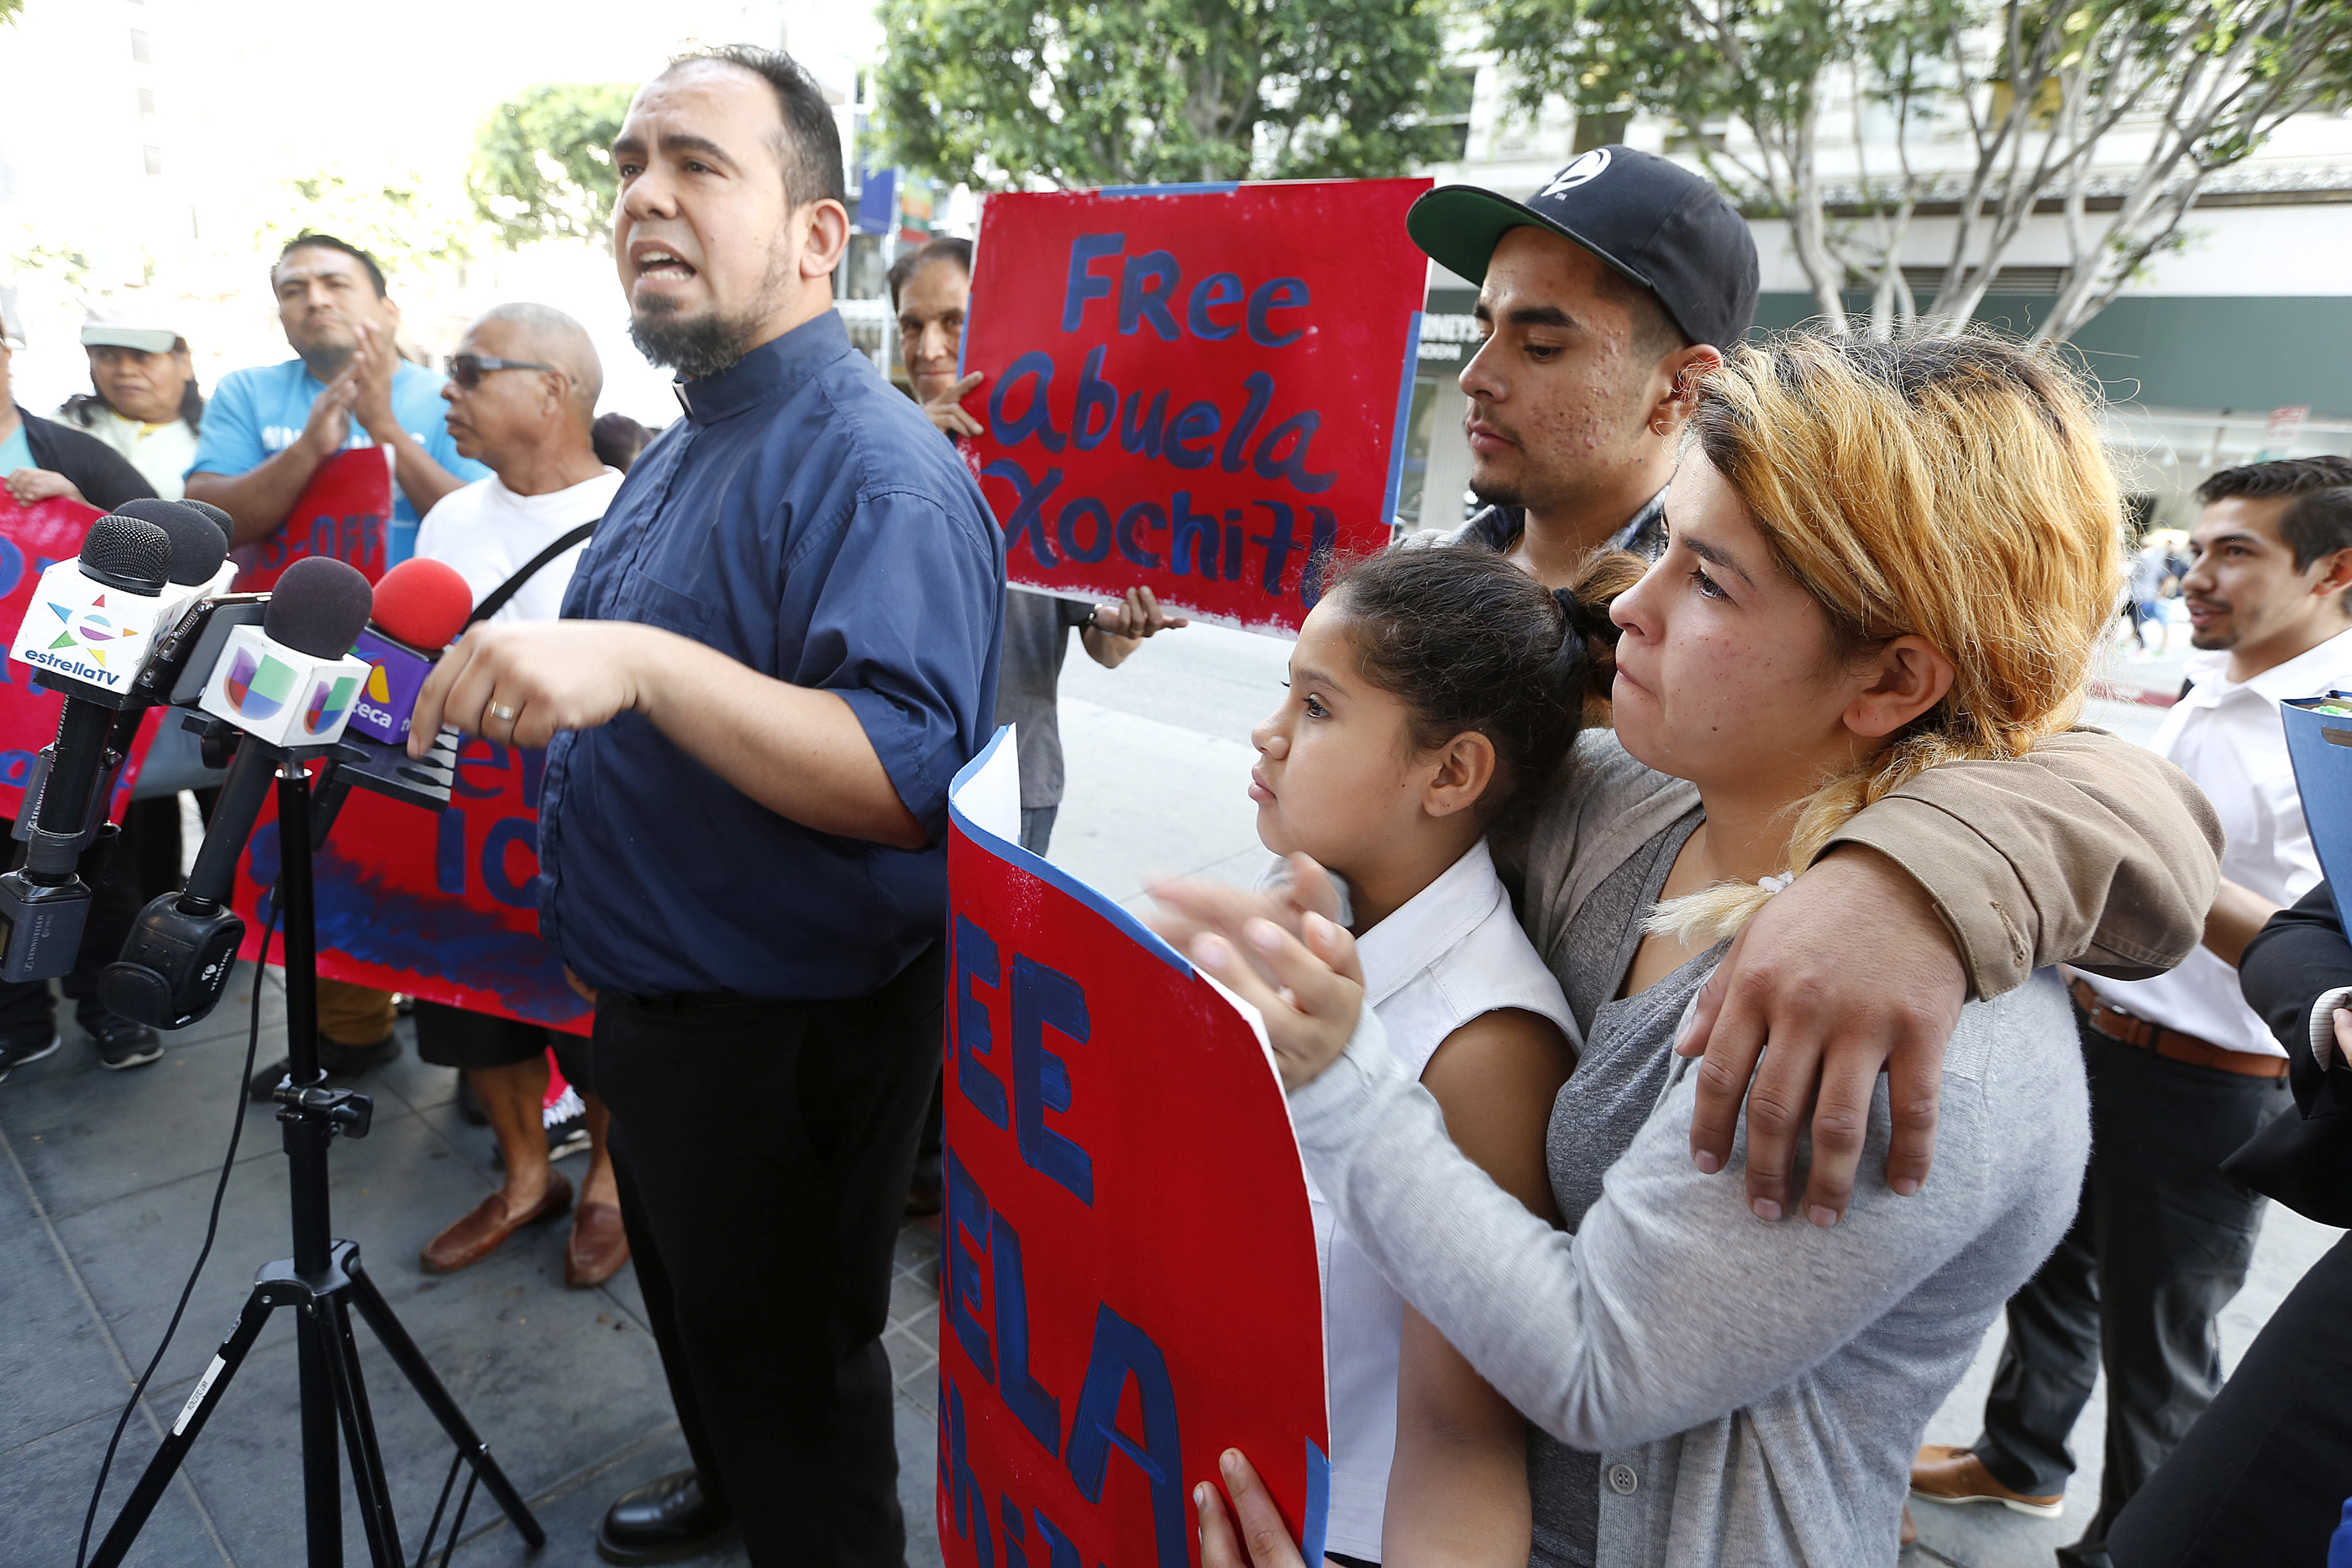 08/23/16/ LOS ANGELES/Stephanie Hernandez, 23, with her brothers Chris, 19, and Leslie, 10, joined by advocates and community leaders hold a news conference in front of the Immigration Court Downtown LA., following the bond hearing of their mother, Xochitl Hernandez, an immigrant grandmother imprisoned by ICE for six months and in deportation proceedings because of false claims of Ògang involvement.Ó (Photo by Aurelia Ventura/ La Opinion)